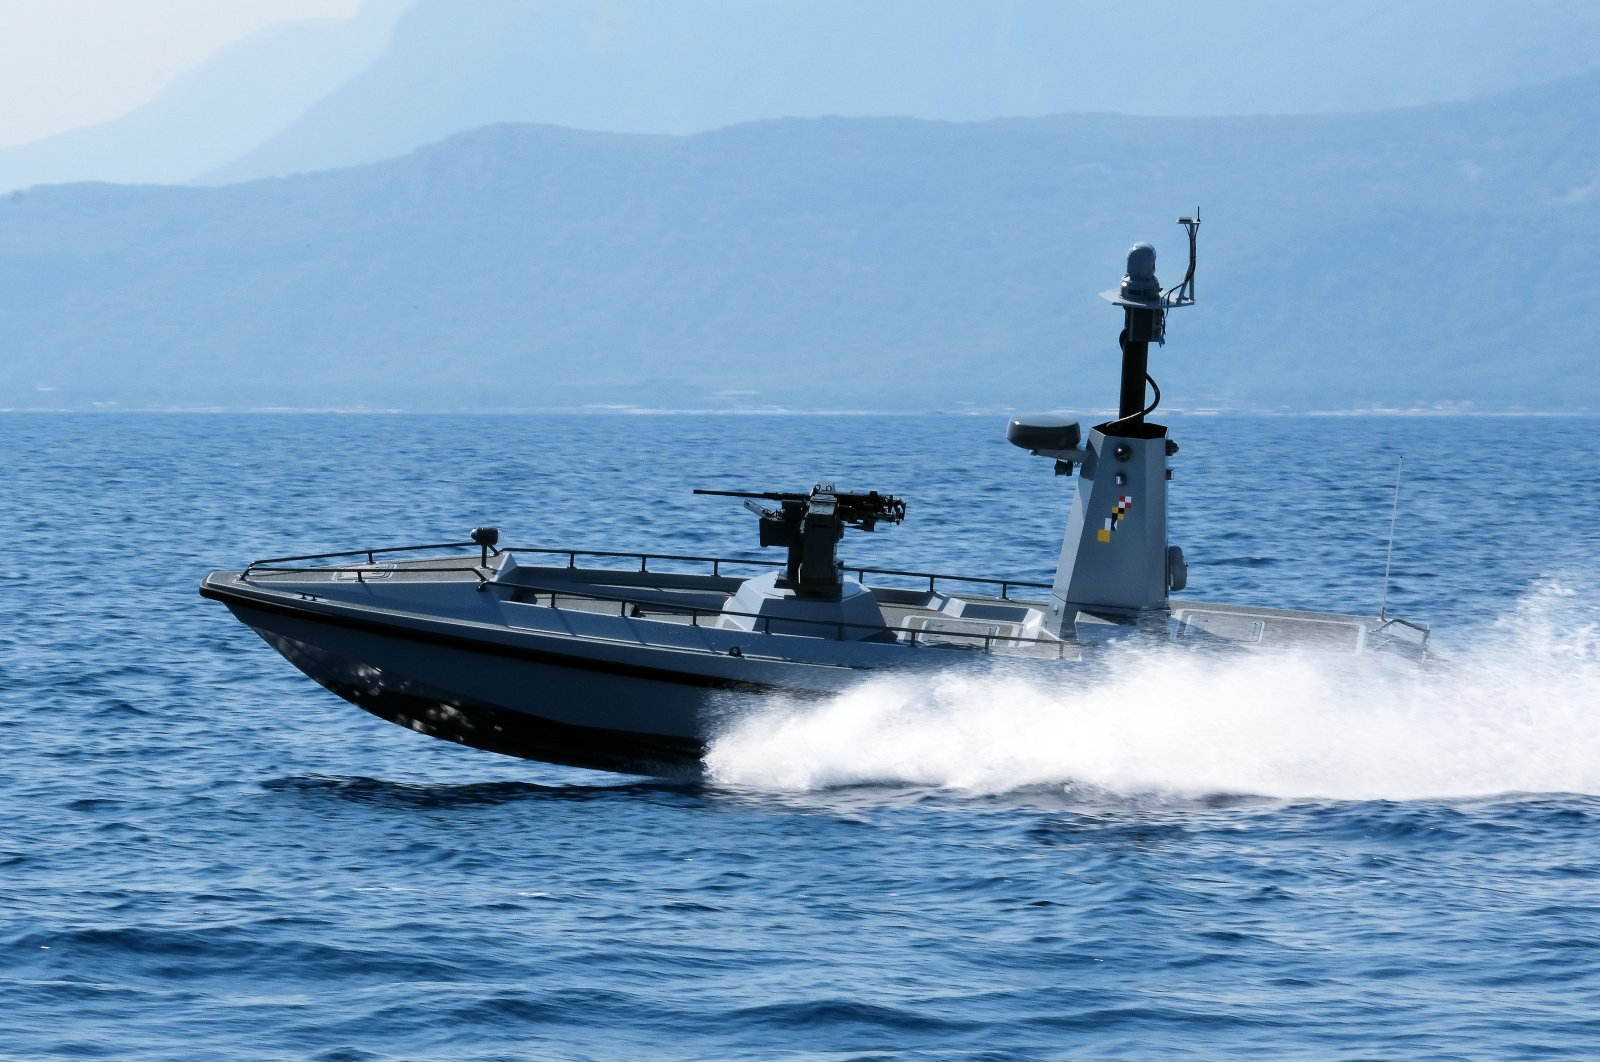 Türkiye’s first armored unmanned surface vessel (AUSV), the first marine craft of the ULAQ project, is seen in this undated photo. (Courtesy of SSB)